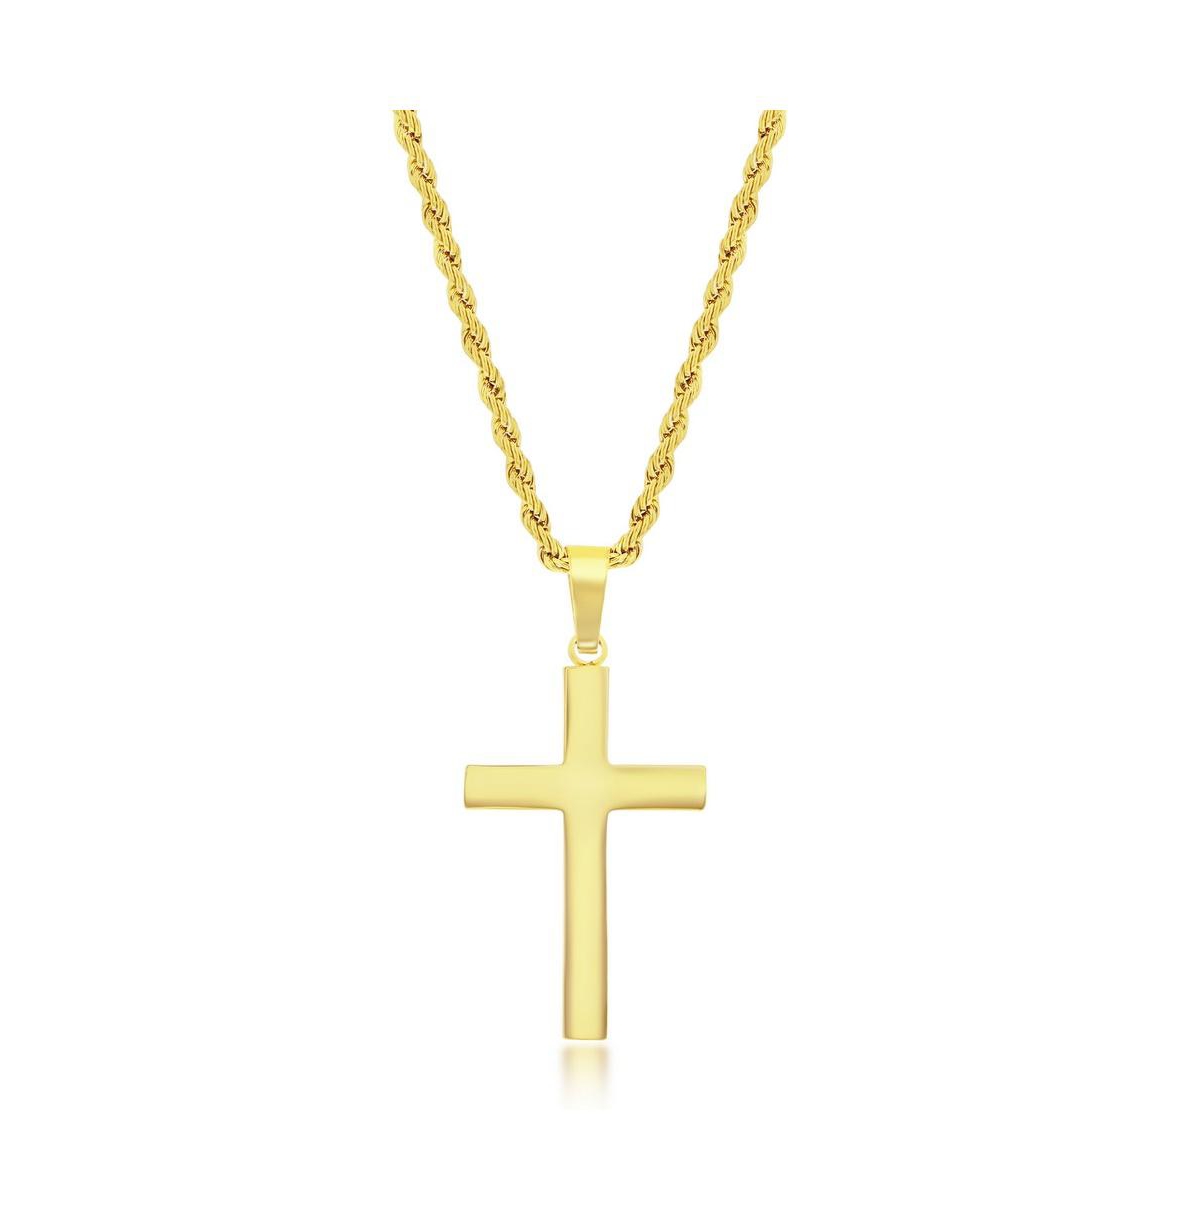 BLACKJACK MENS STAINLESS STEEL POLISHED CROSS NECKLACE - GOLD PLATED